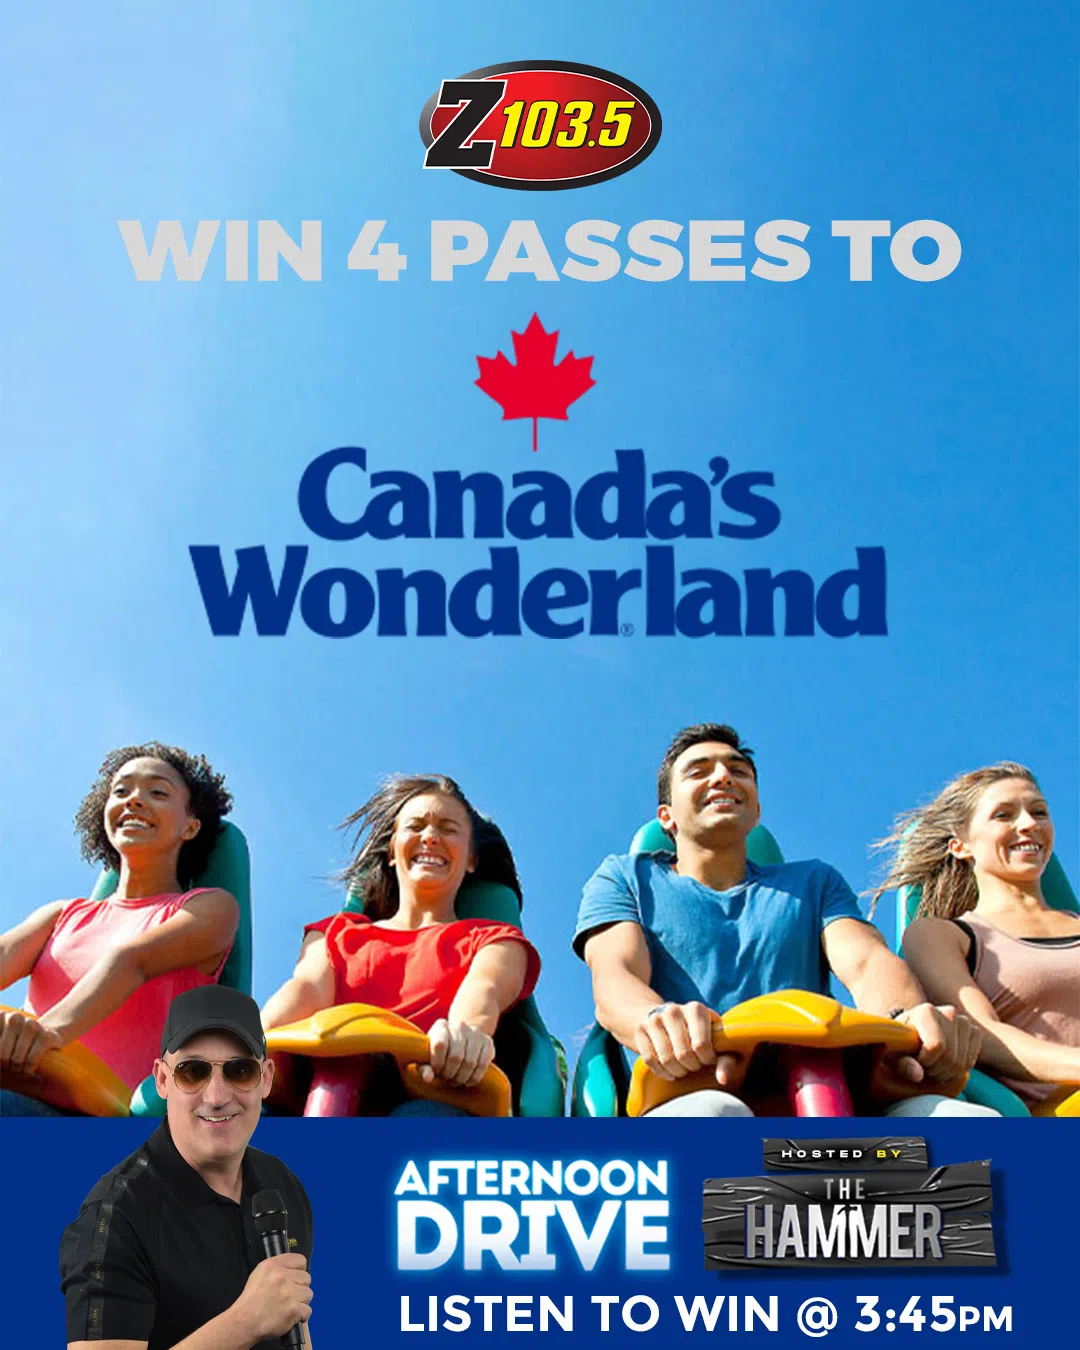 Feature: https://z1035.com/win/win-a-four-pack-of-tickets-to-canadas-wonderland/